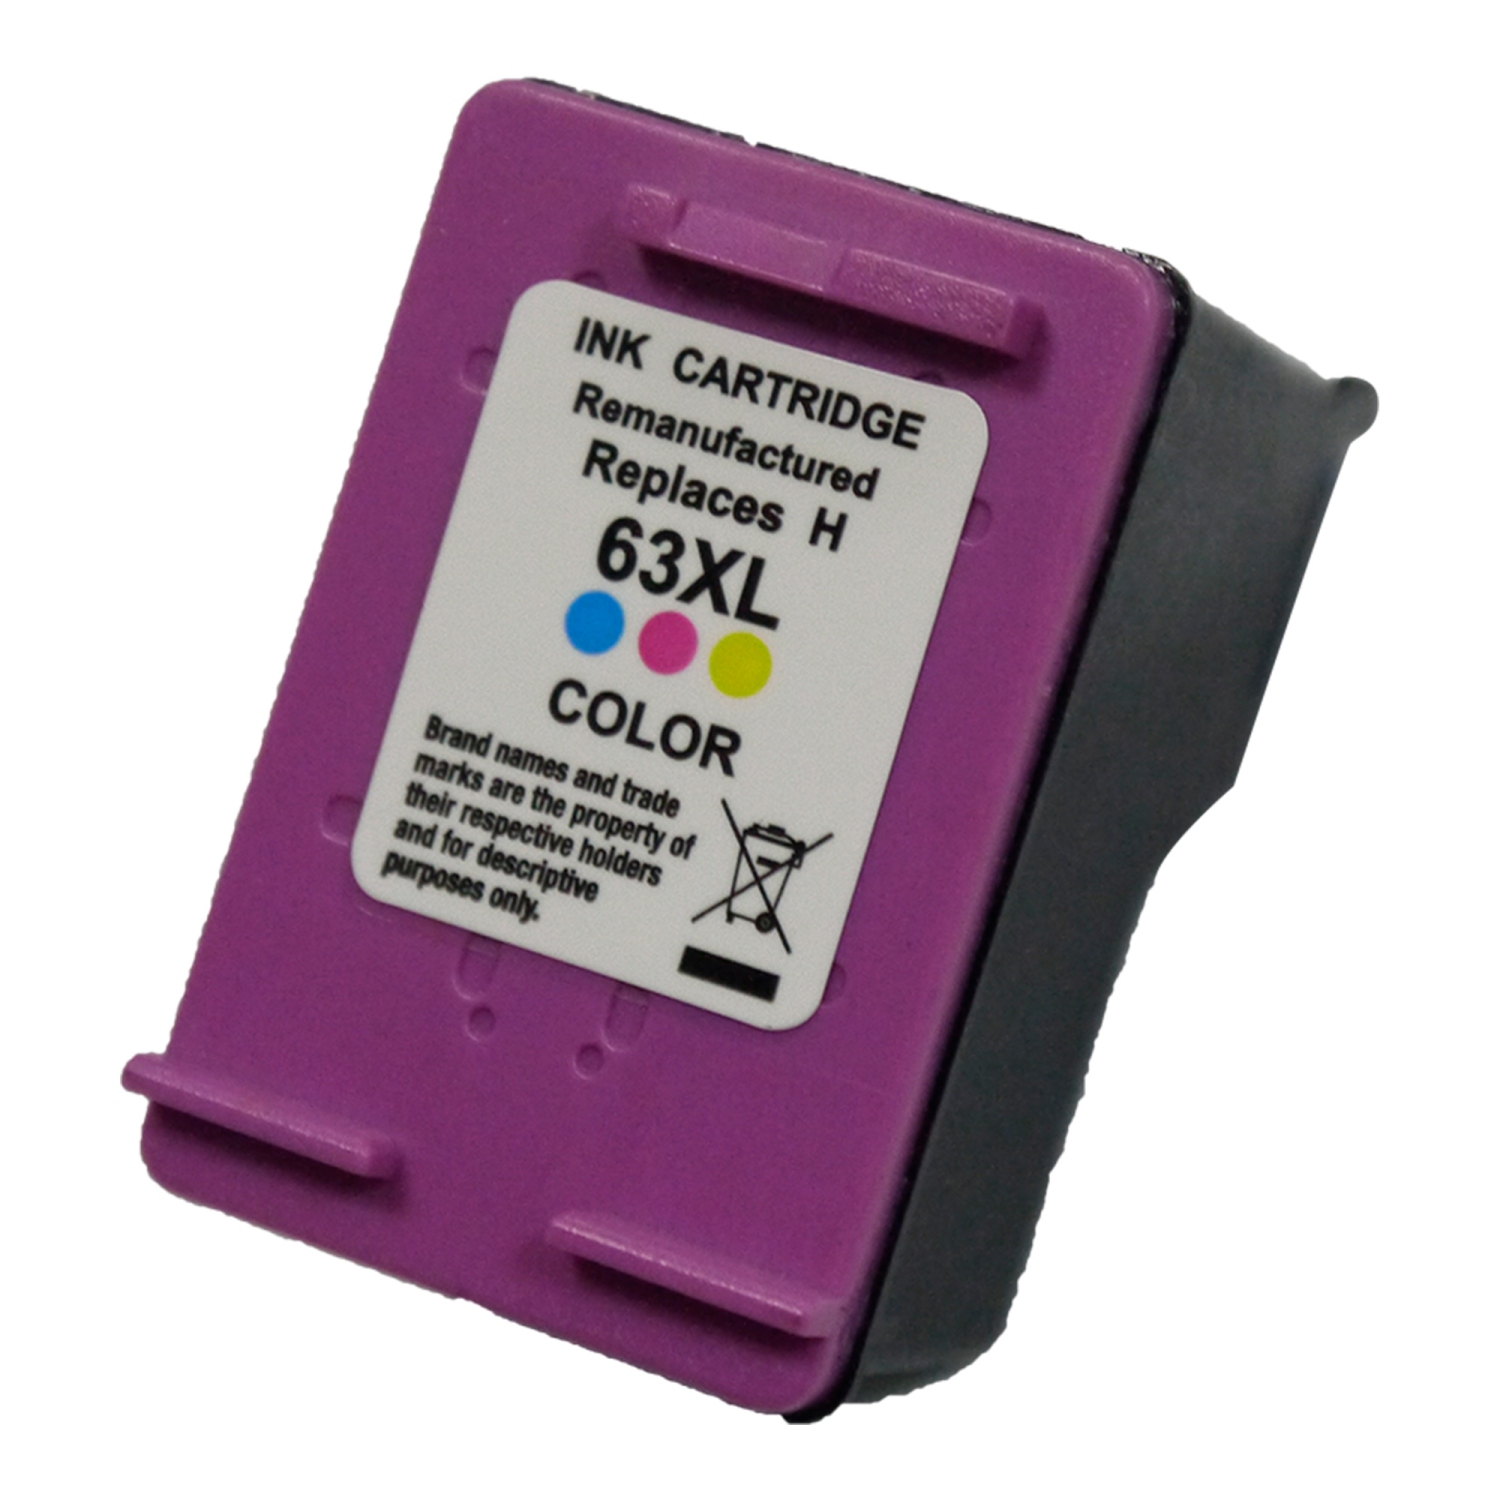 NEW SUPERIOR QUALITY! HP 63XL Color Compatible Ink Cartridge - FREE SHIPPING OVER $50!!